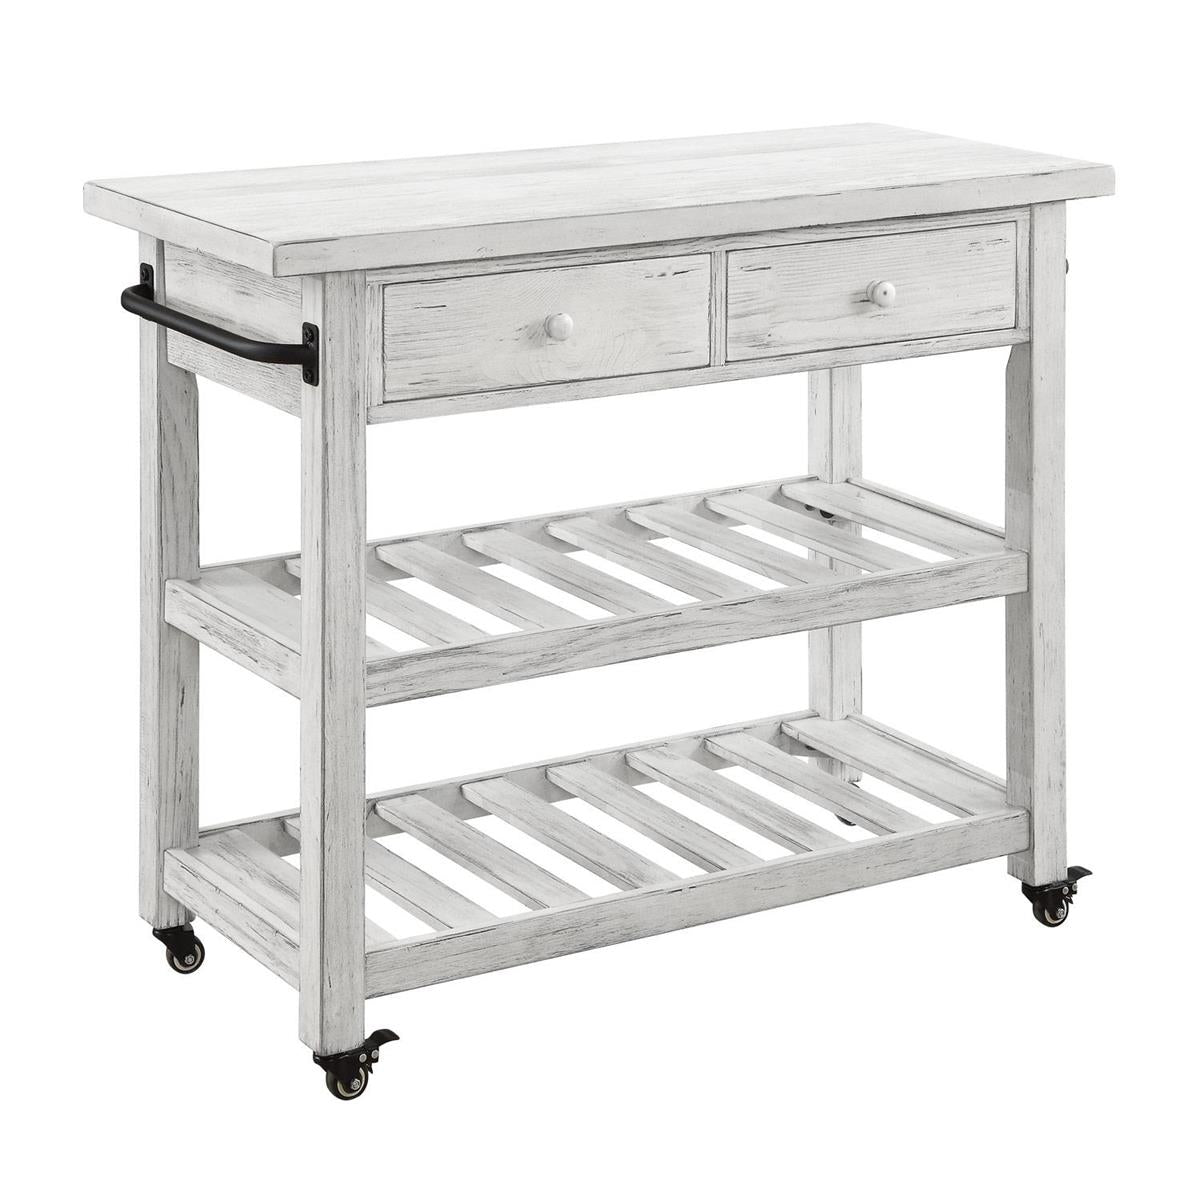 WEEKLY or MONTHLY. Orchard Brown Kitchen Cart